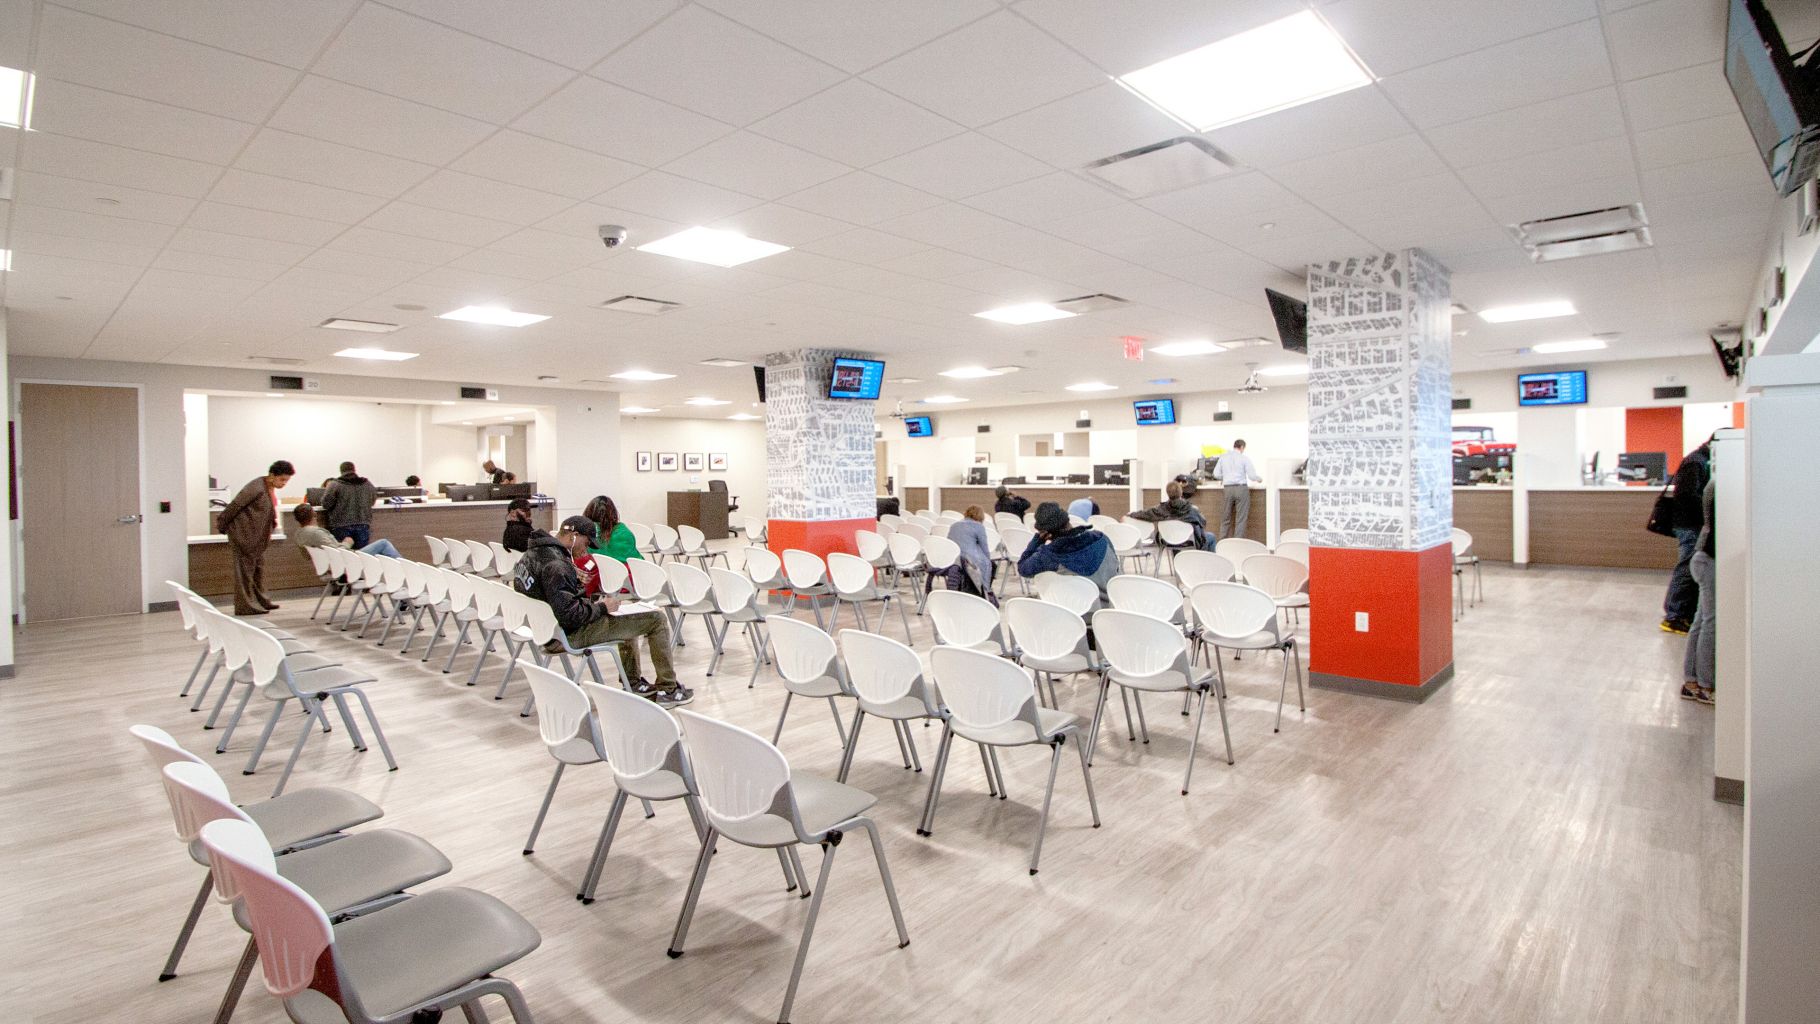 DMV Opens New Adjucation Services Location, Designed by MMD